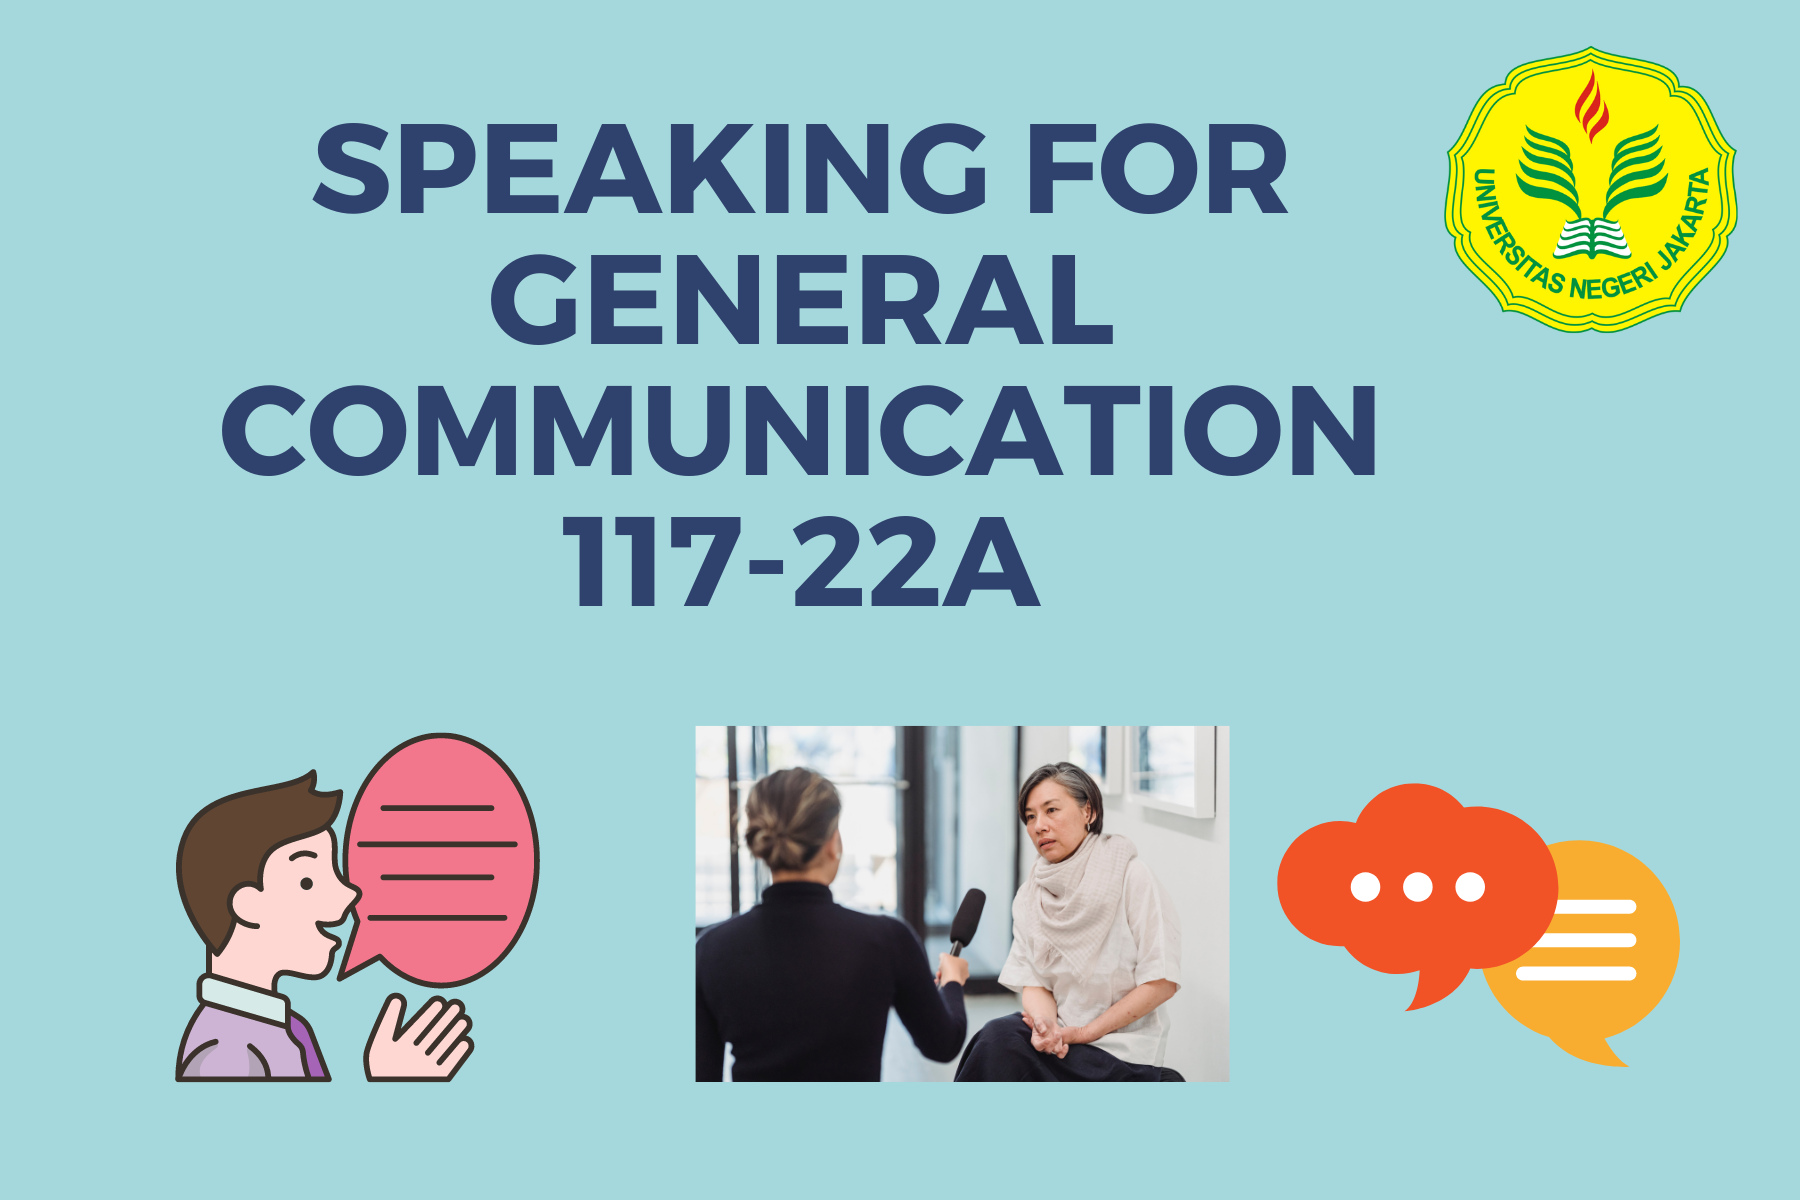 Speaking for General Communication (117-22A)